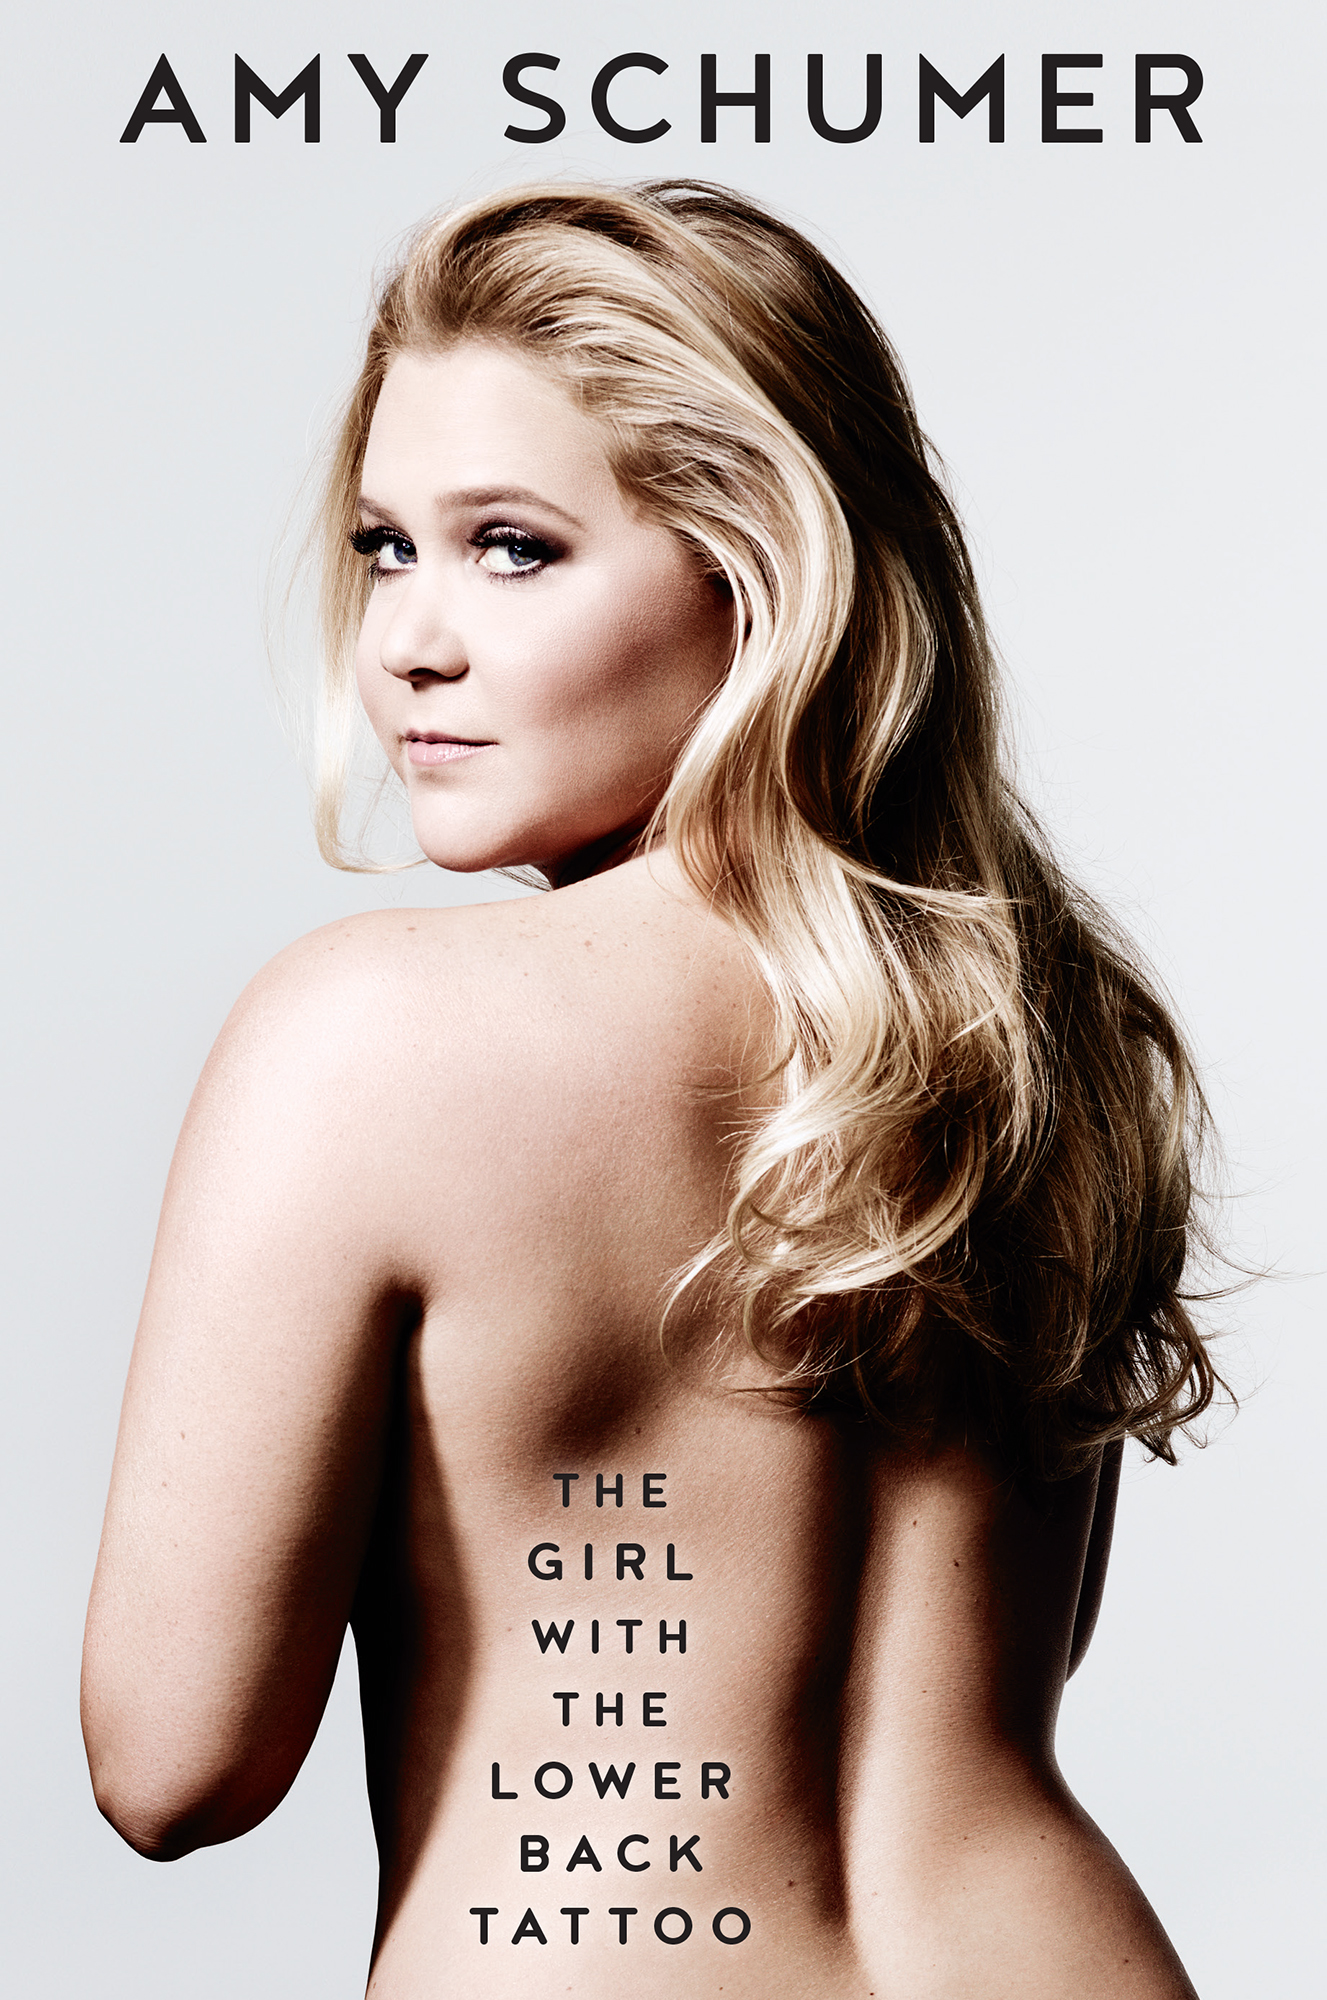 Amy Schumer: The Girl With The Lower Back Tattoo (EBook, 2016, Gallery Books (Simon & Schuster))